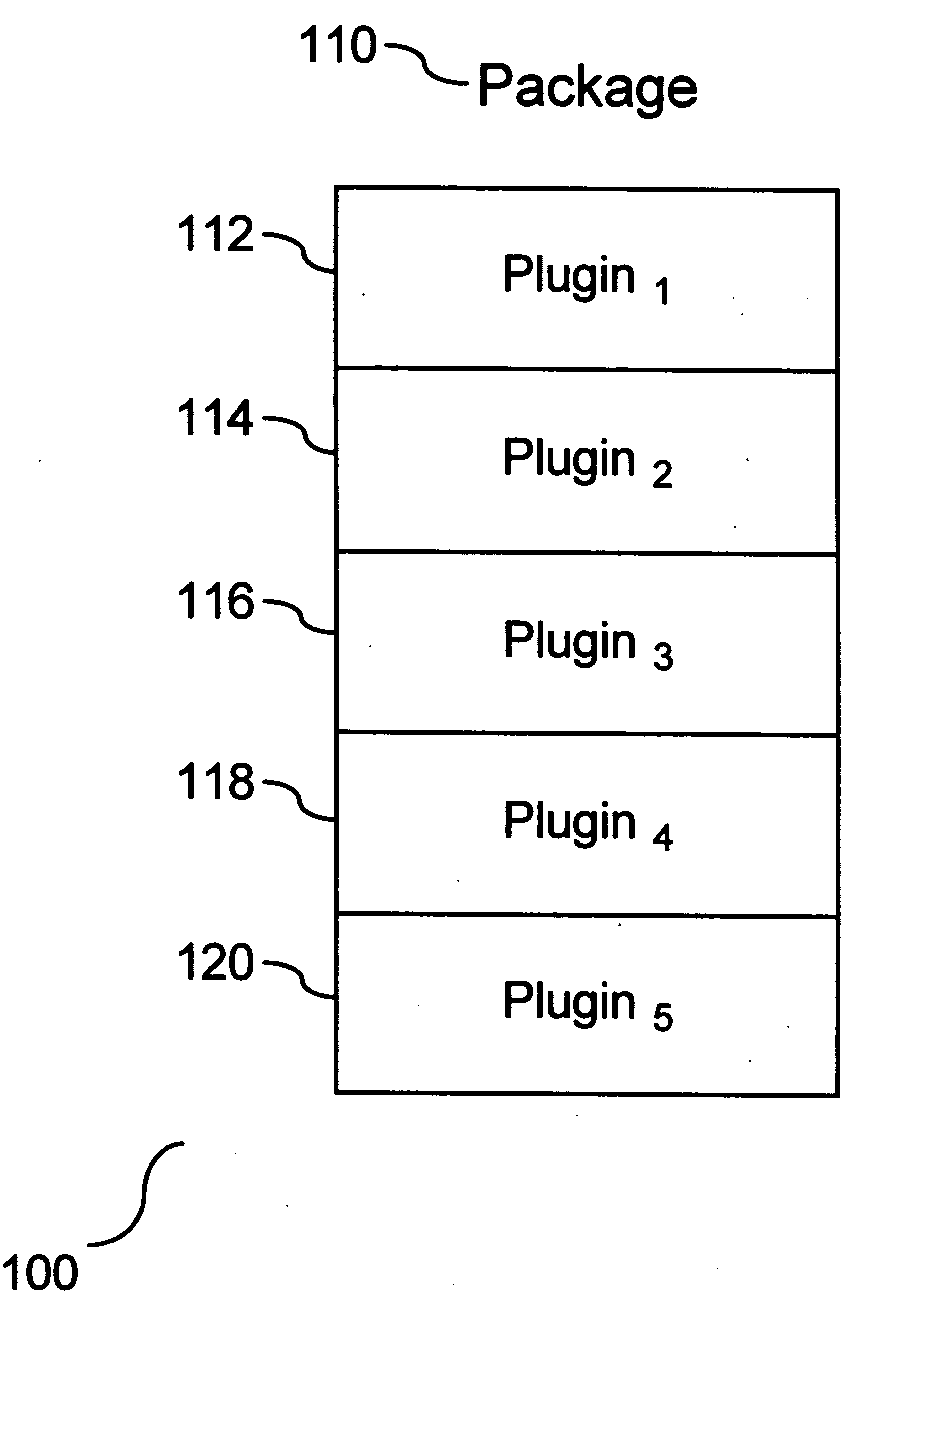 Software packaging model supporting multiple entity types